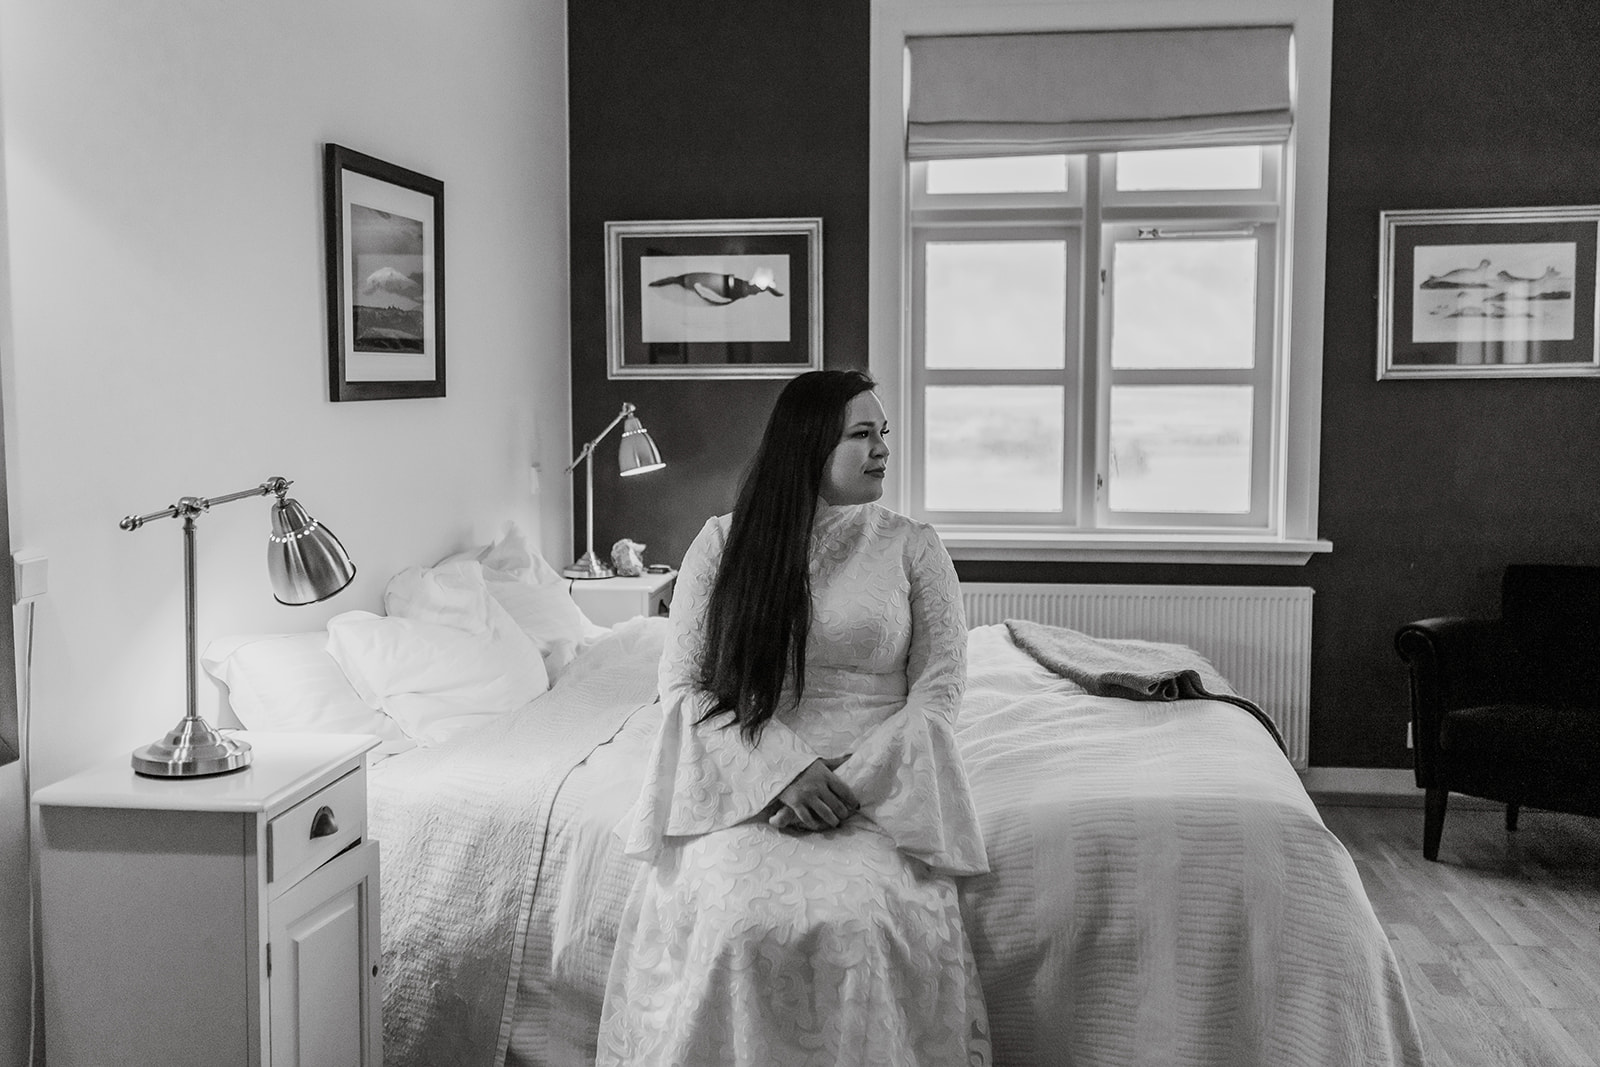 Bride is sitting on the bed waiting to get married in the black church in Iceland